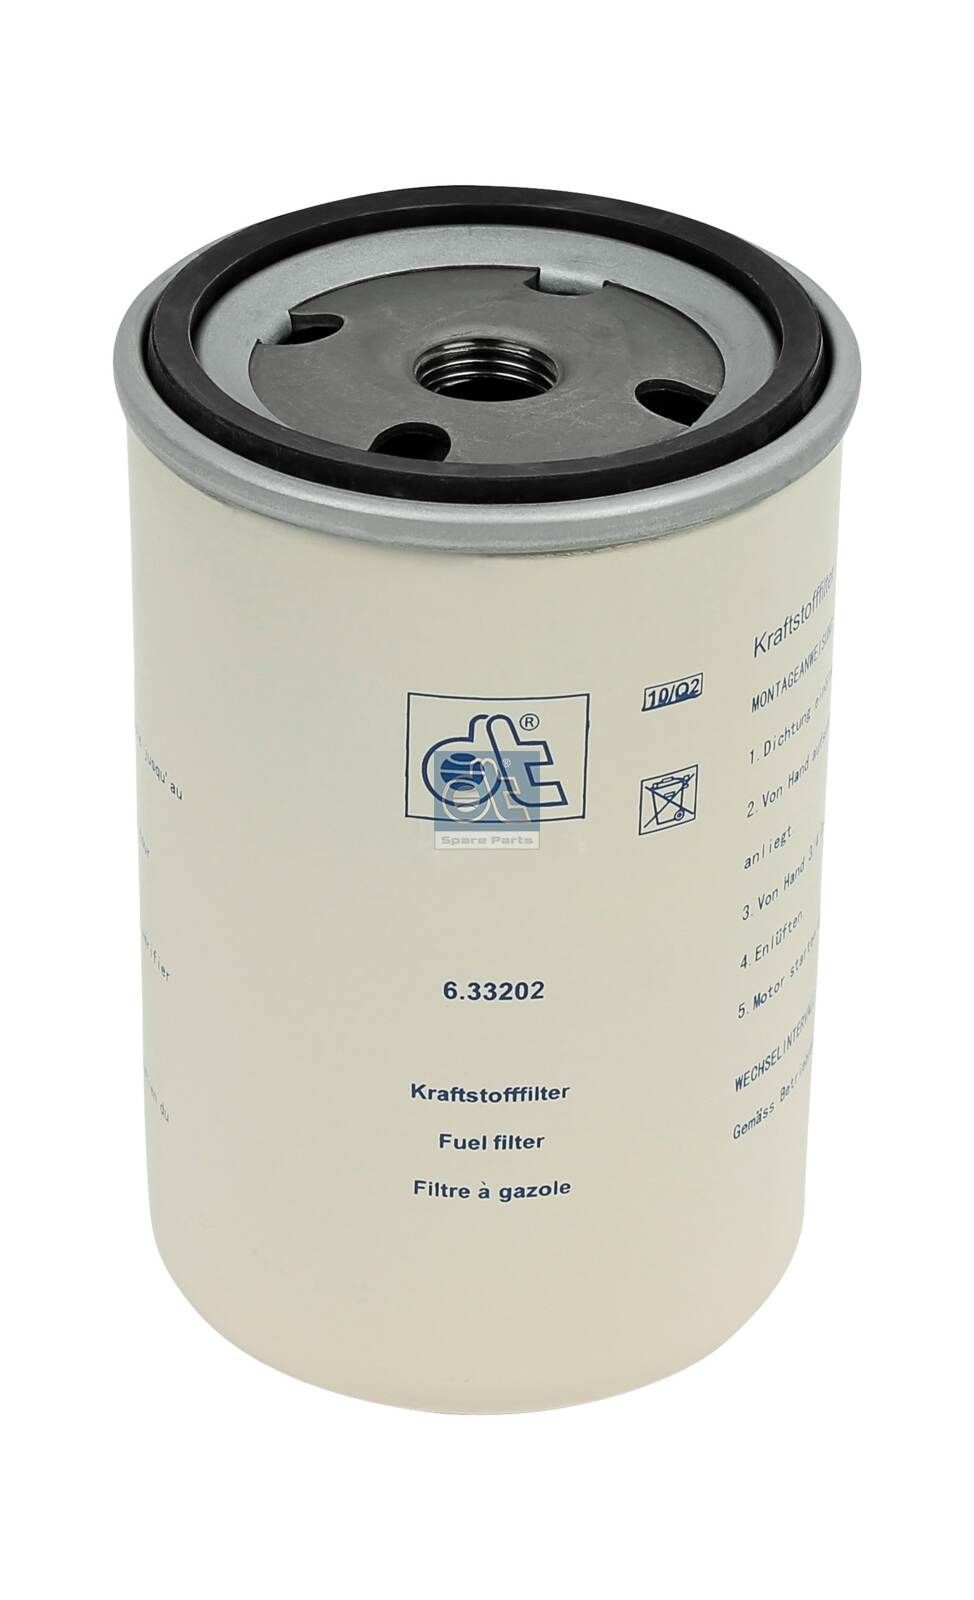 WK 727 DT Spare Parts 6.33202 Fuel filter 5000 686 589